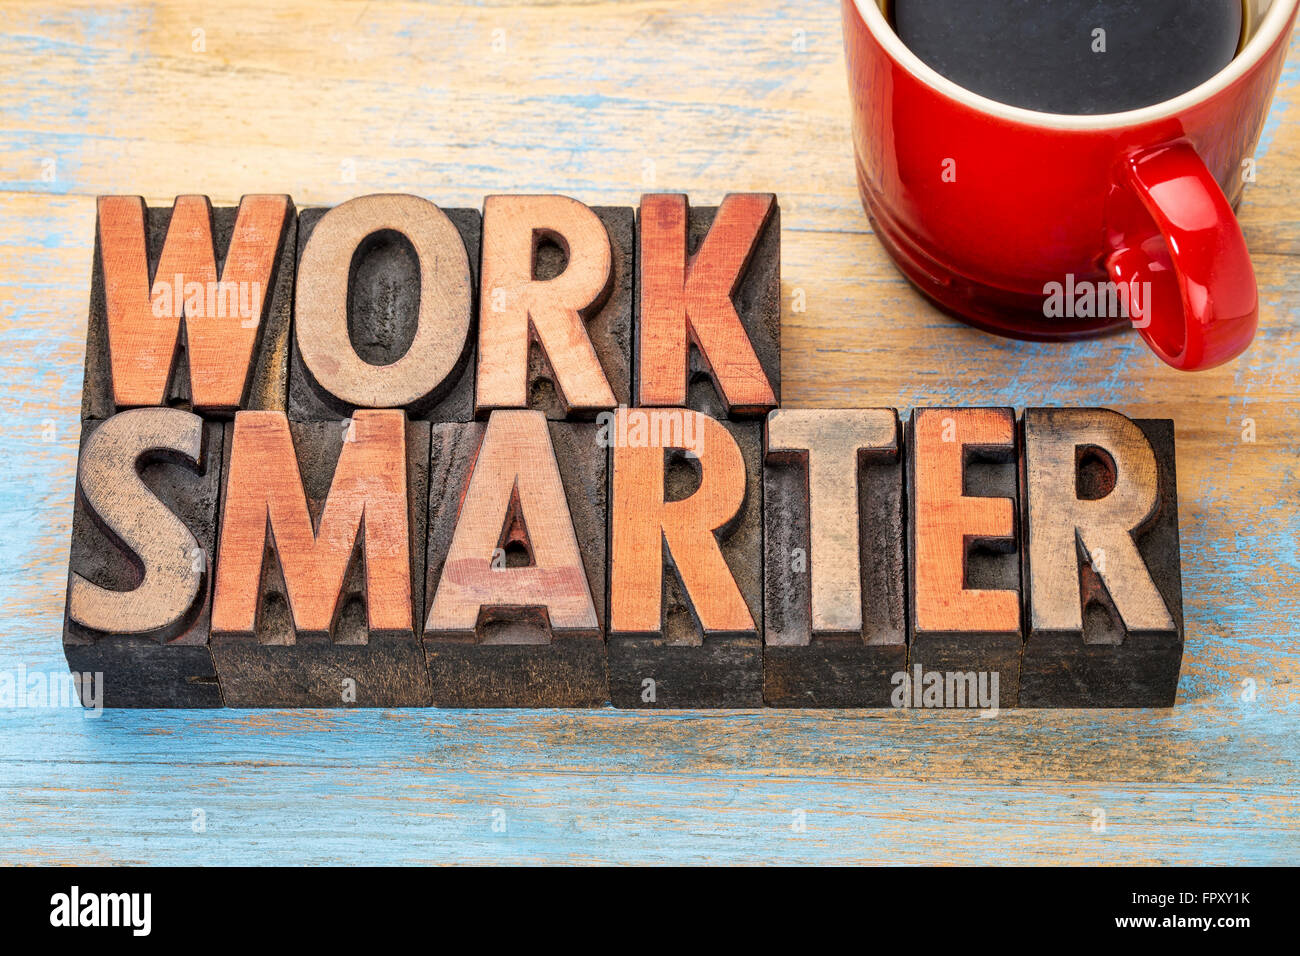 work smarter advice - words in vintage letterpress wood type blocks stained by color inks with a cup of coffee Stock Photo